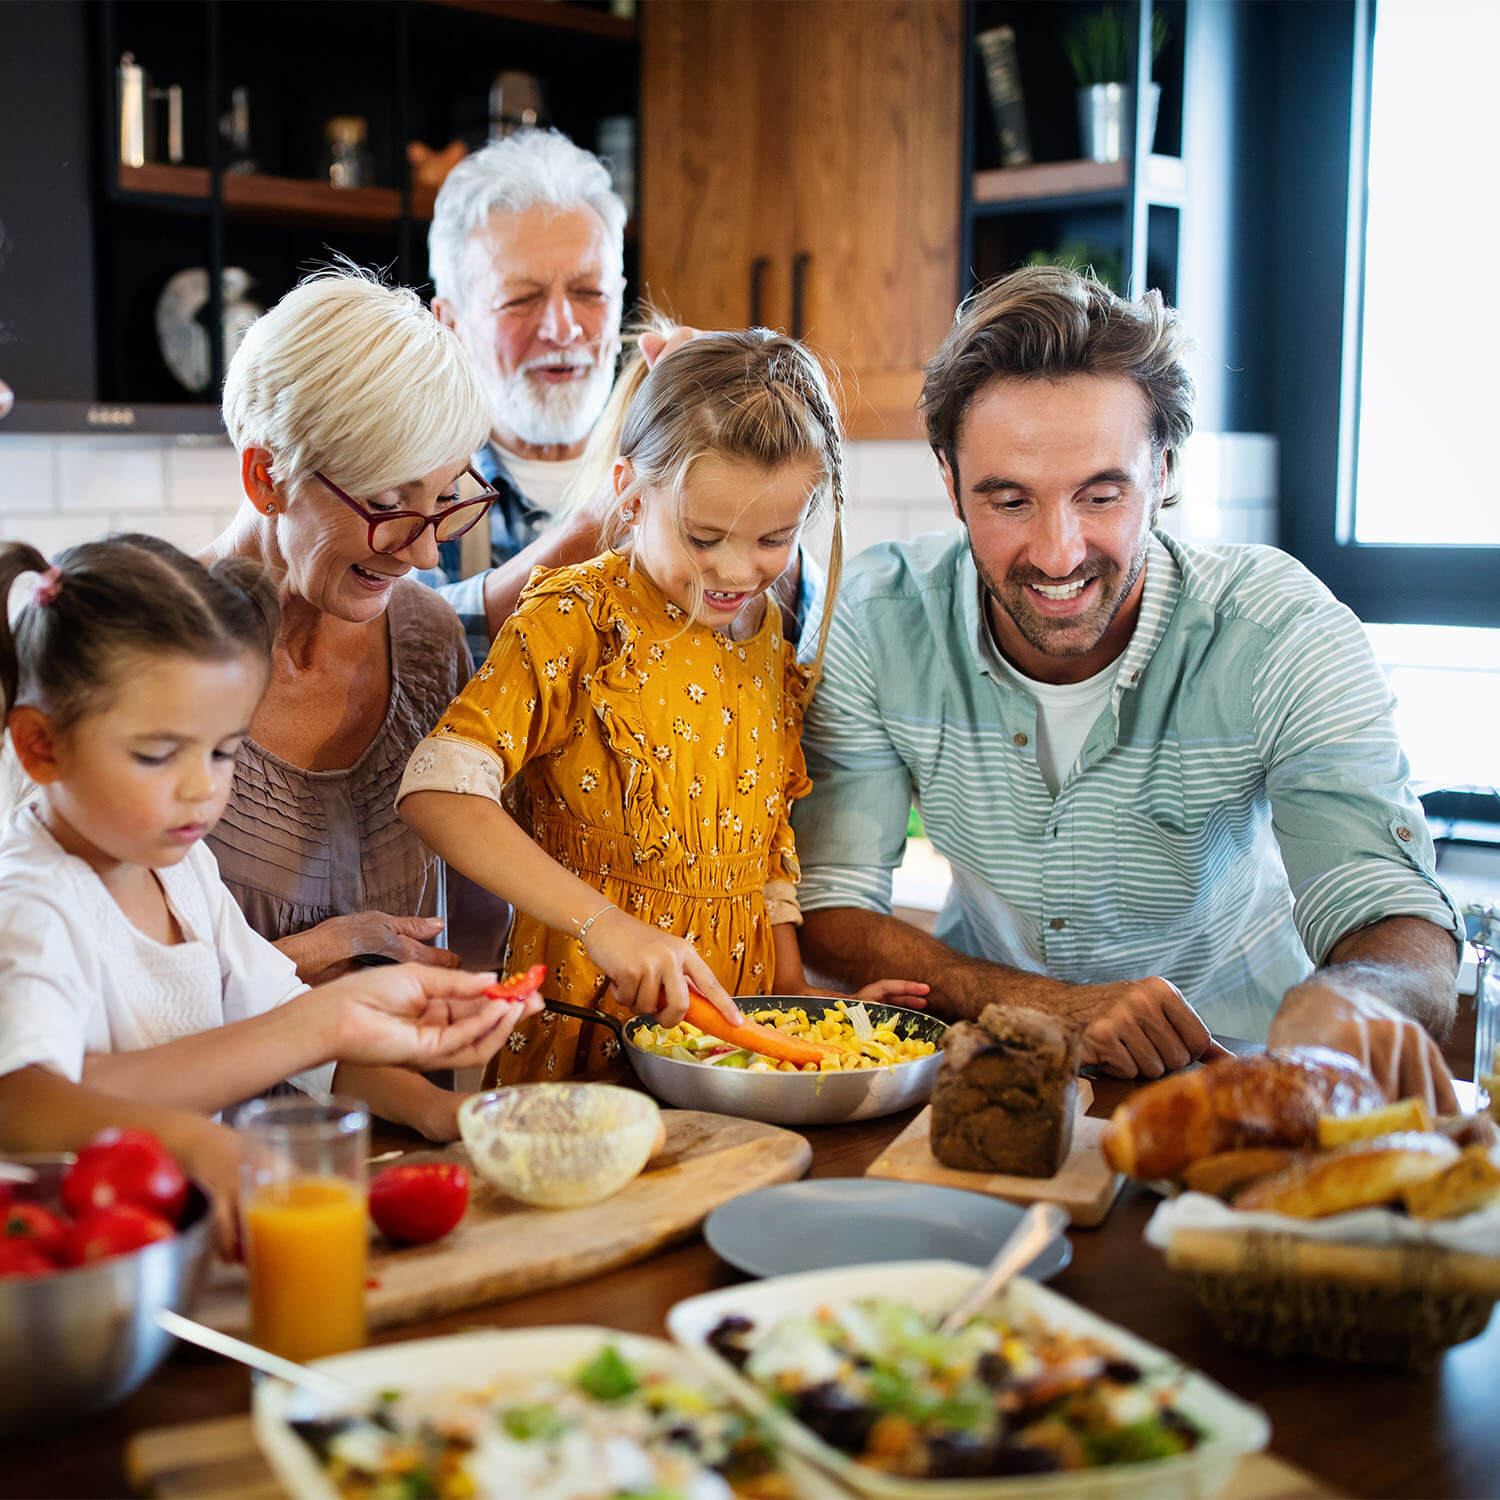 Cheerful happy family spending good time together while cooking in kitchen